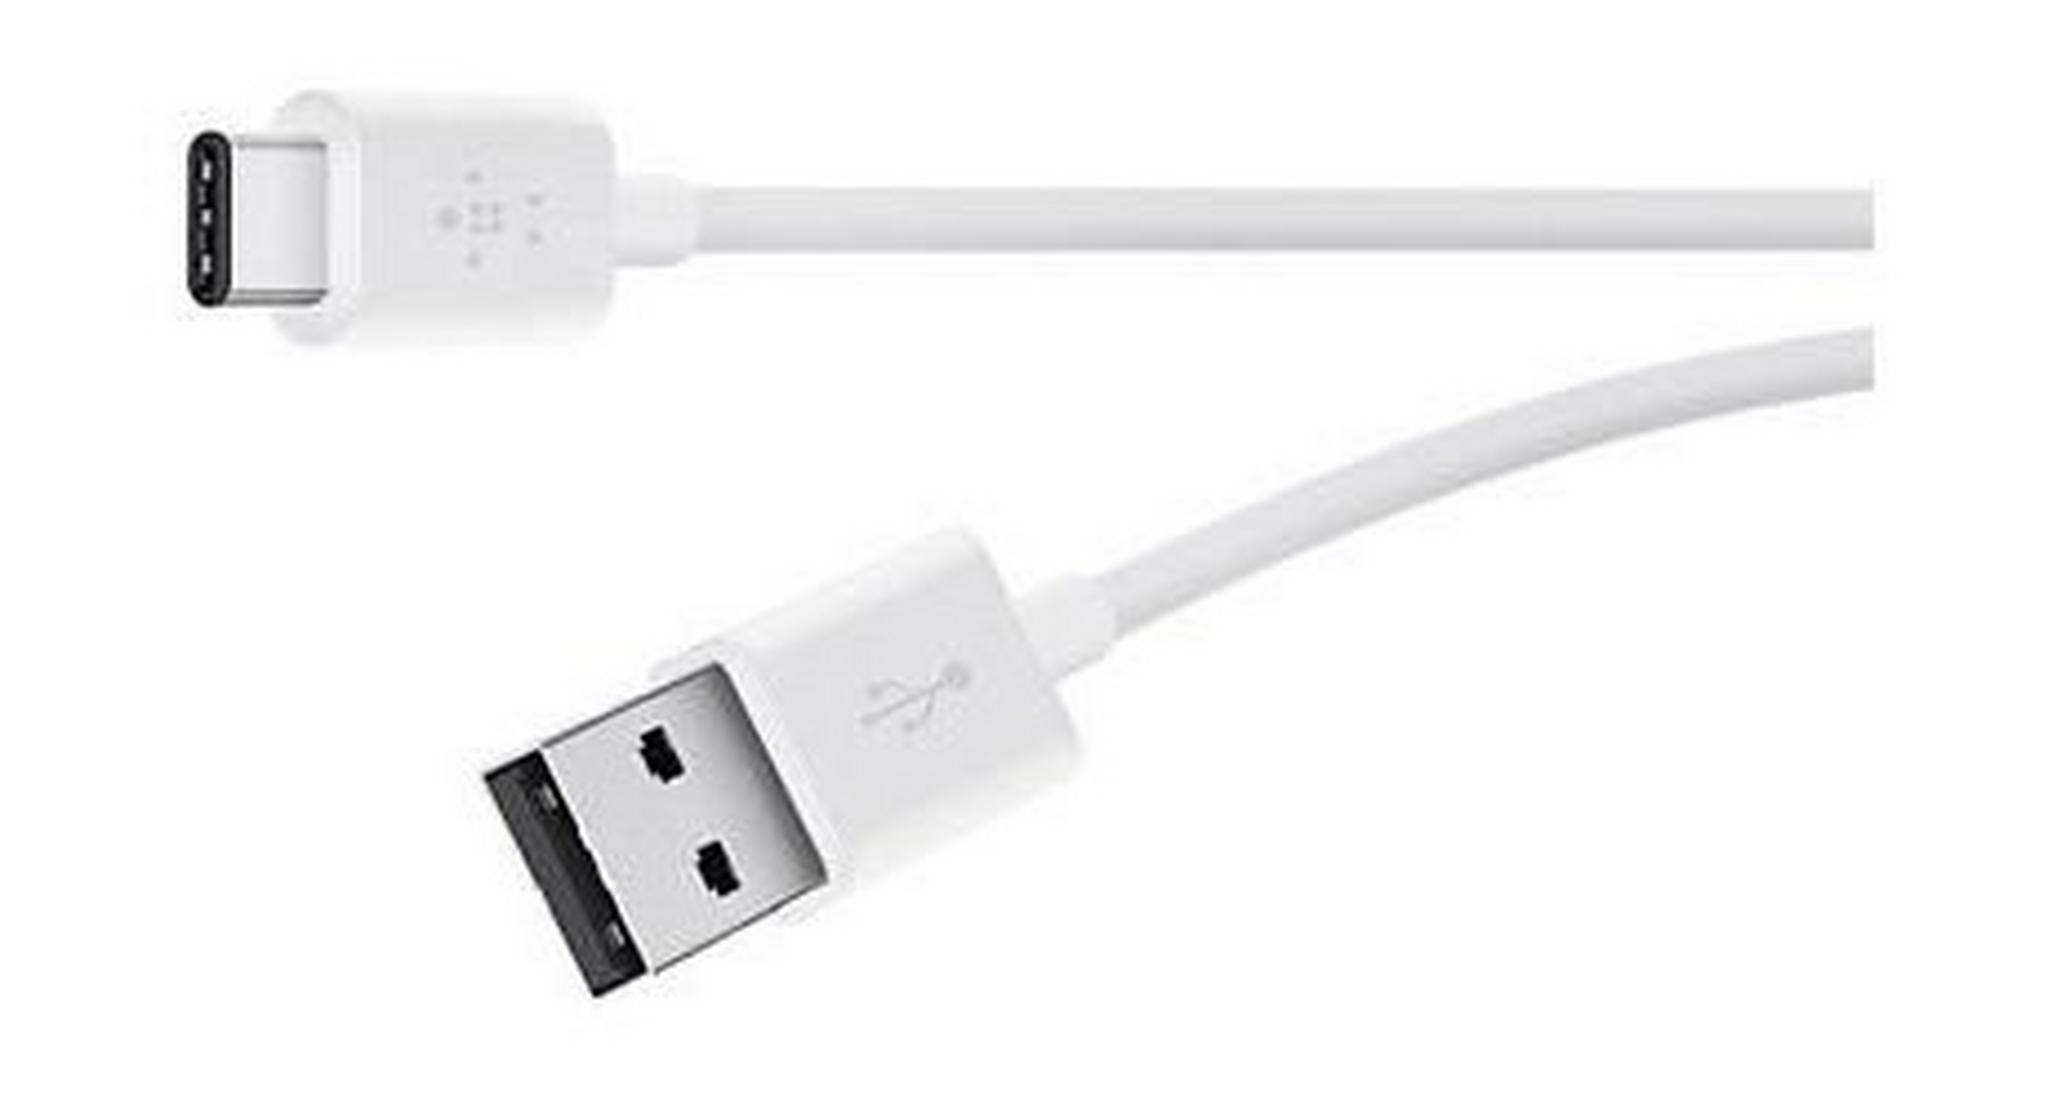 Belkin 3.1 USB-A to USB-C Cable 1.8 Meter (F2CU032bt06) - White